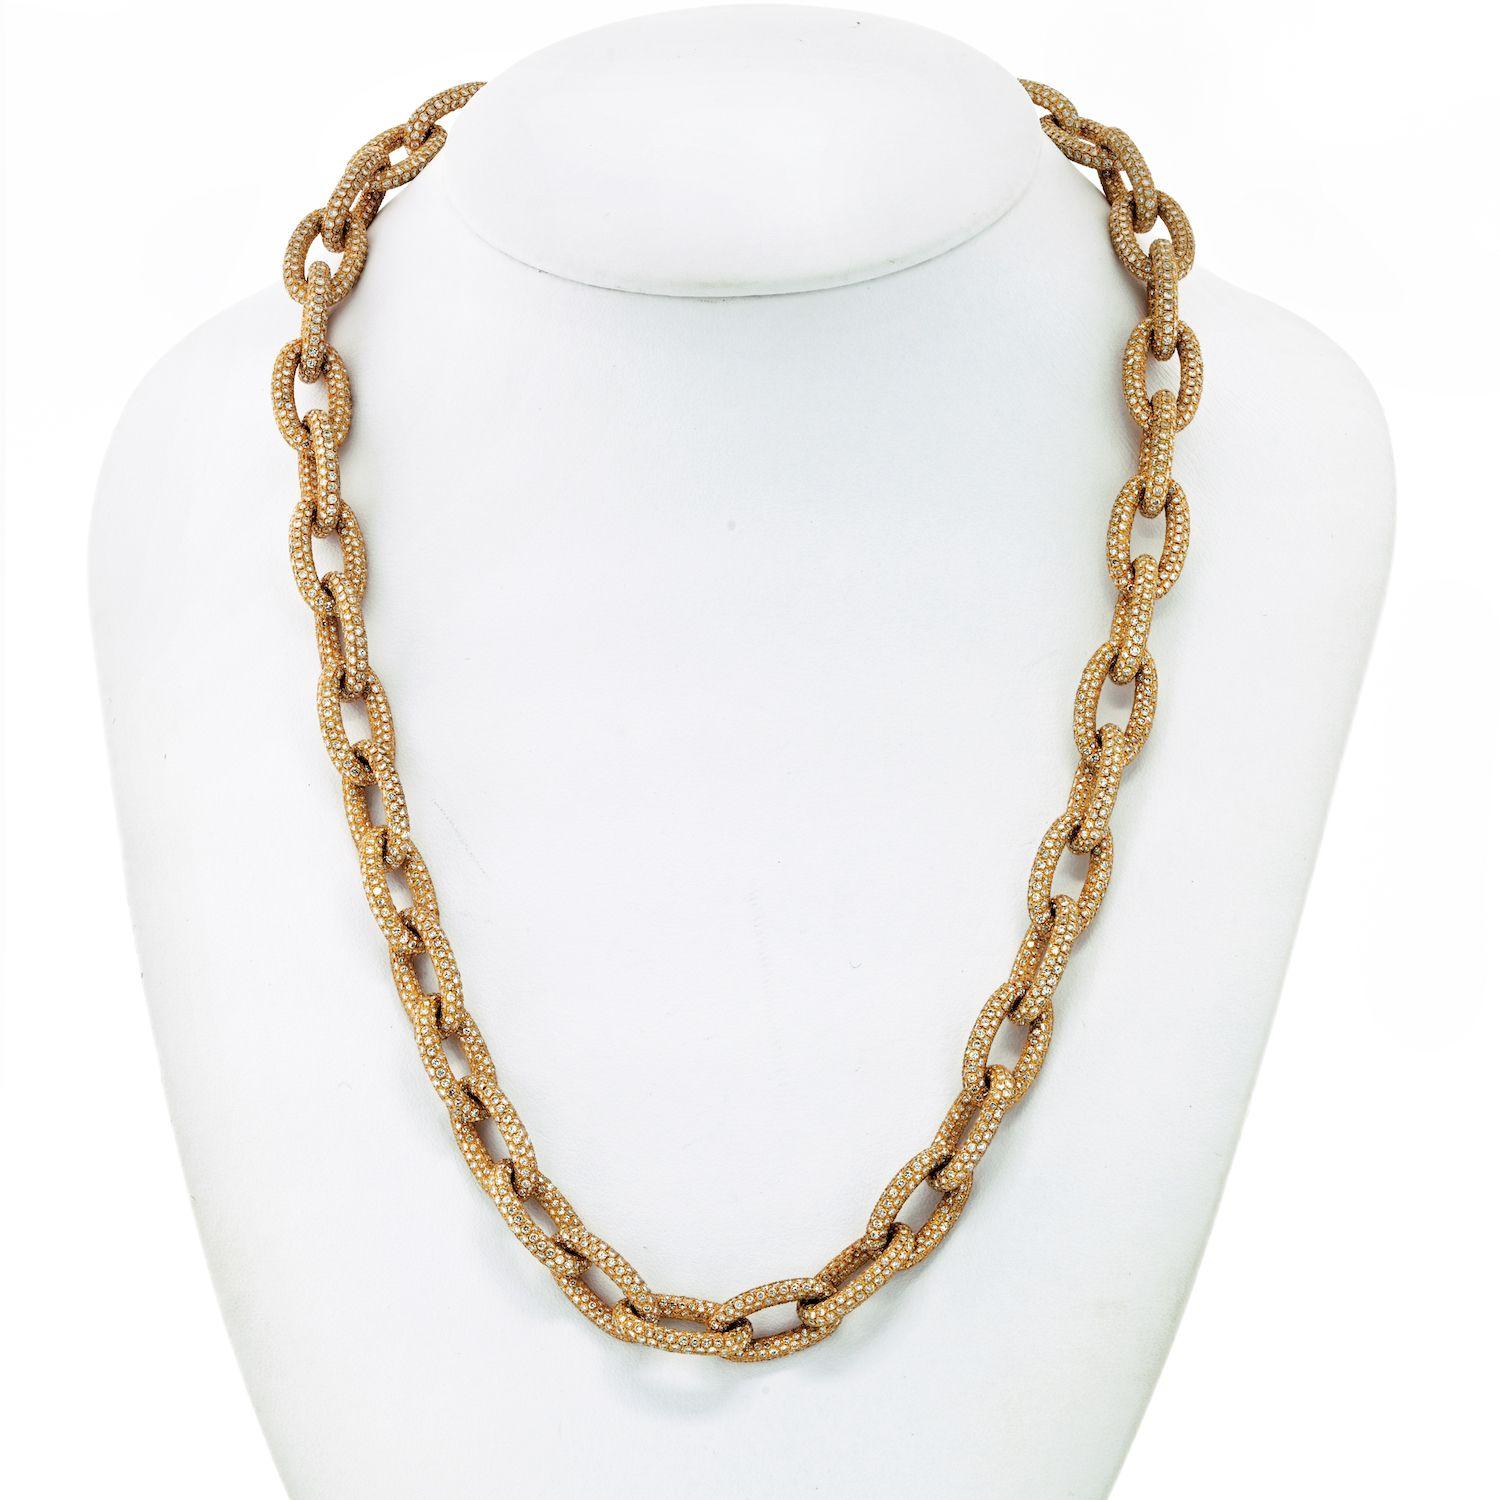 An 18k yellow gold long chain of oval textured linking, decorated with round brilliant-cut diamonds of approx. 85 carats. 
Diamond Quality: F-G color, VS-SI clarity.
The necklace is 24 inches long. 